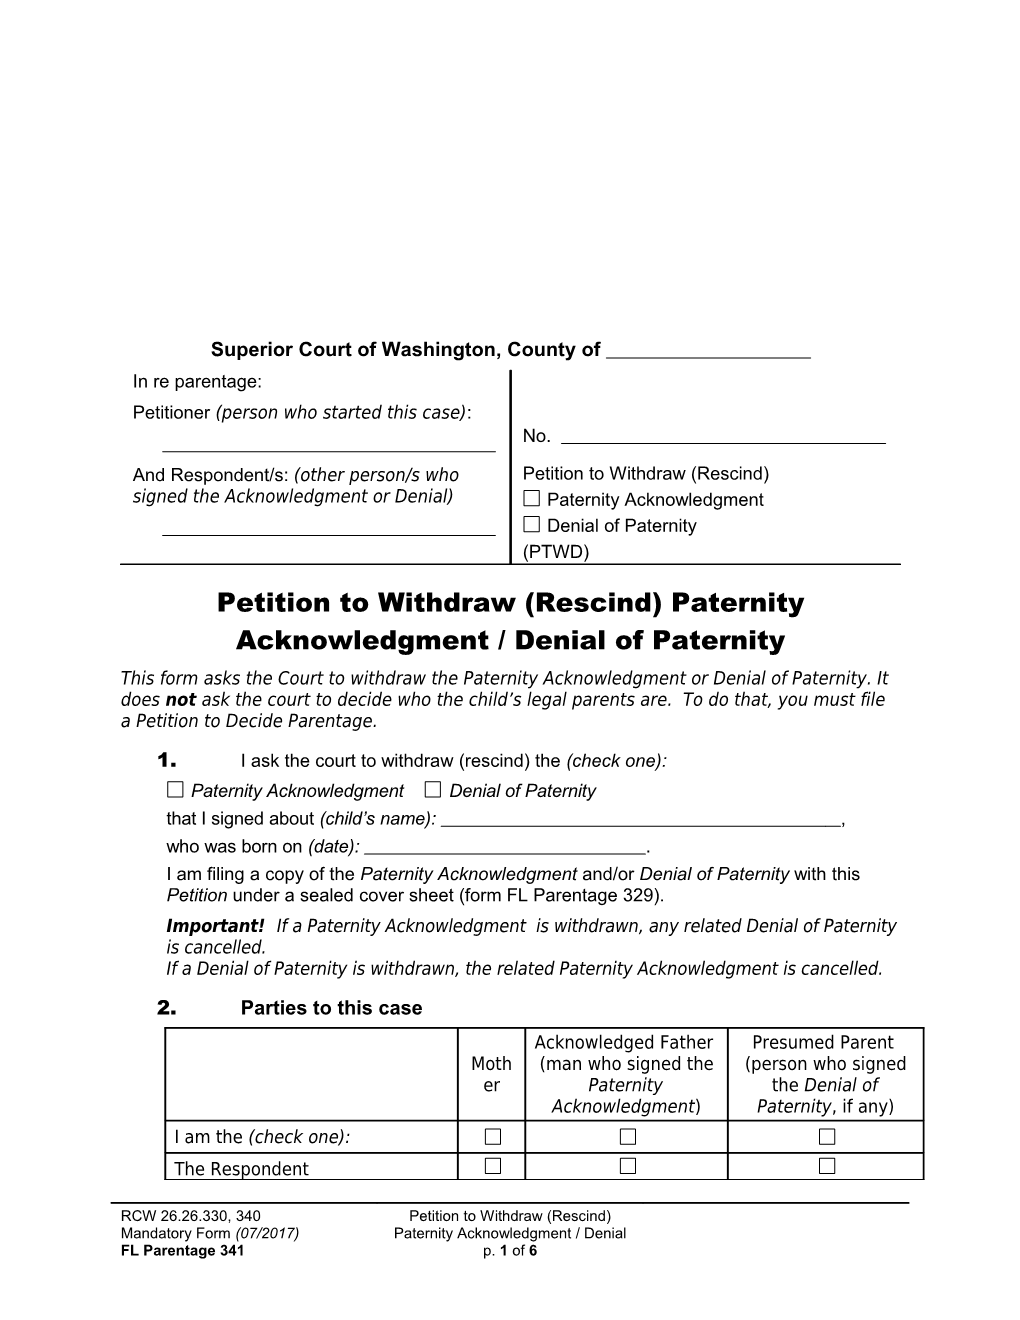 Petition to Withdraw (Rescind) Paternity Acknowledgment / Denial of Paternity